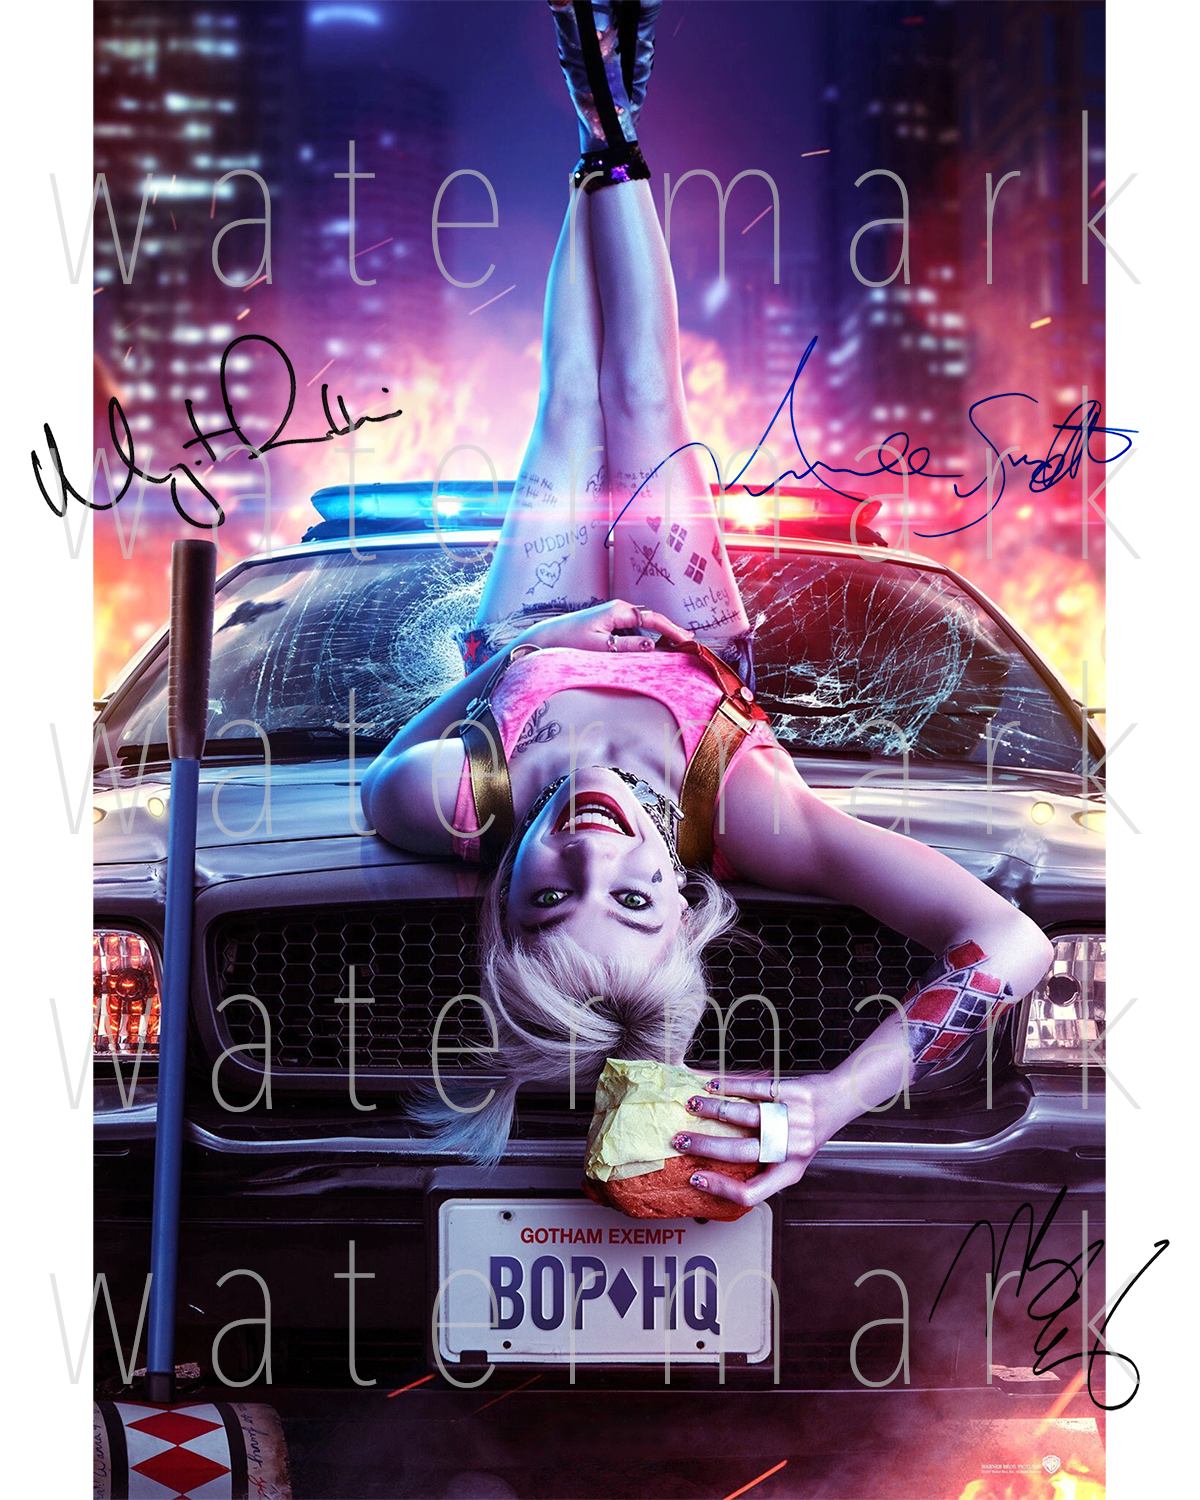 Birds of Prey singed Margot Harley Quinn Photo Poster painting 8X10 poster picture autograph RP